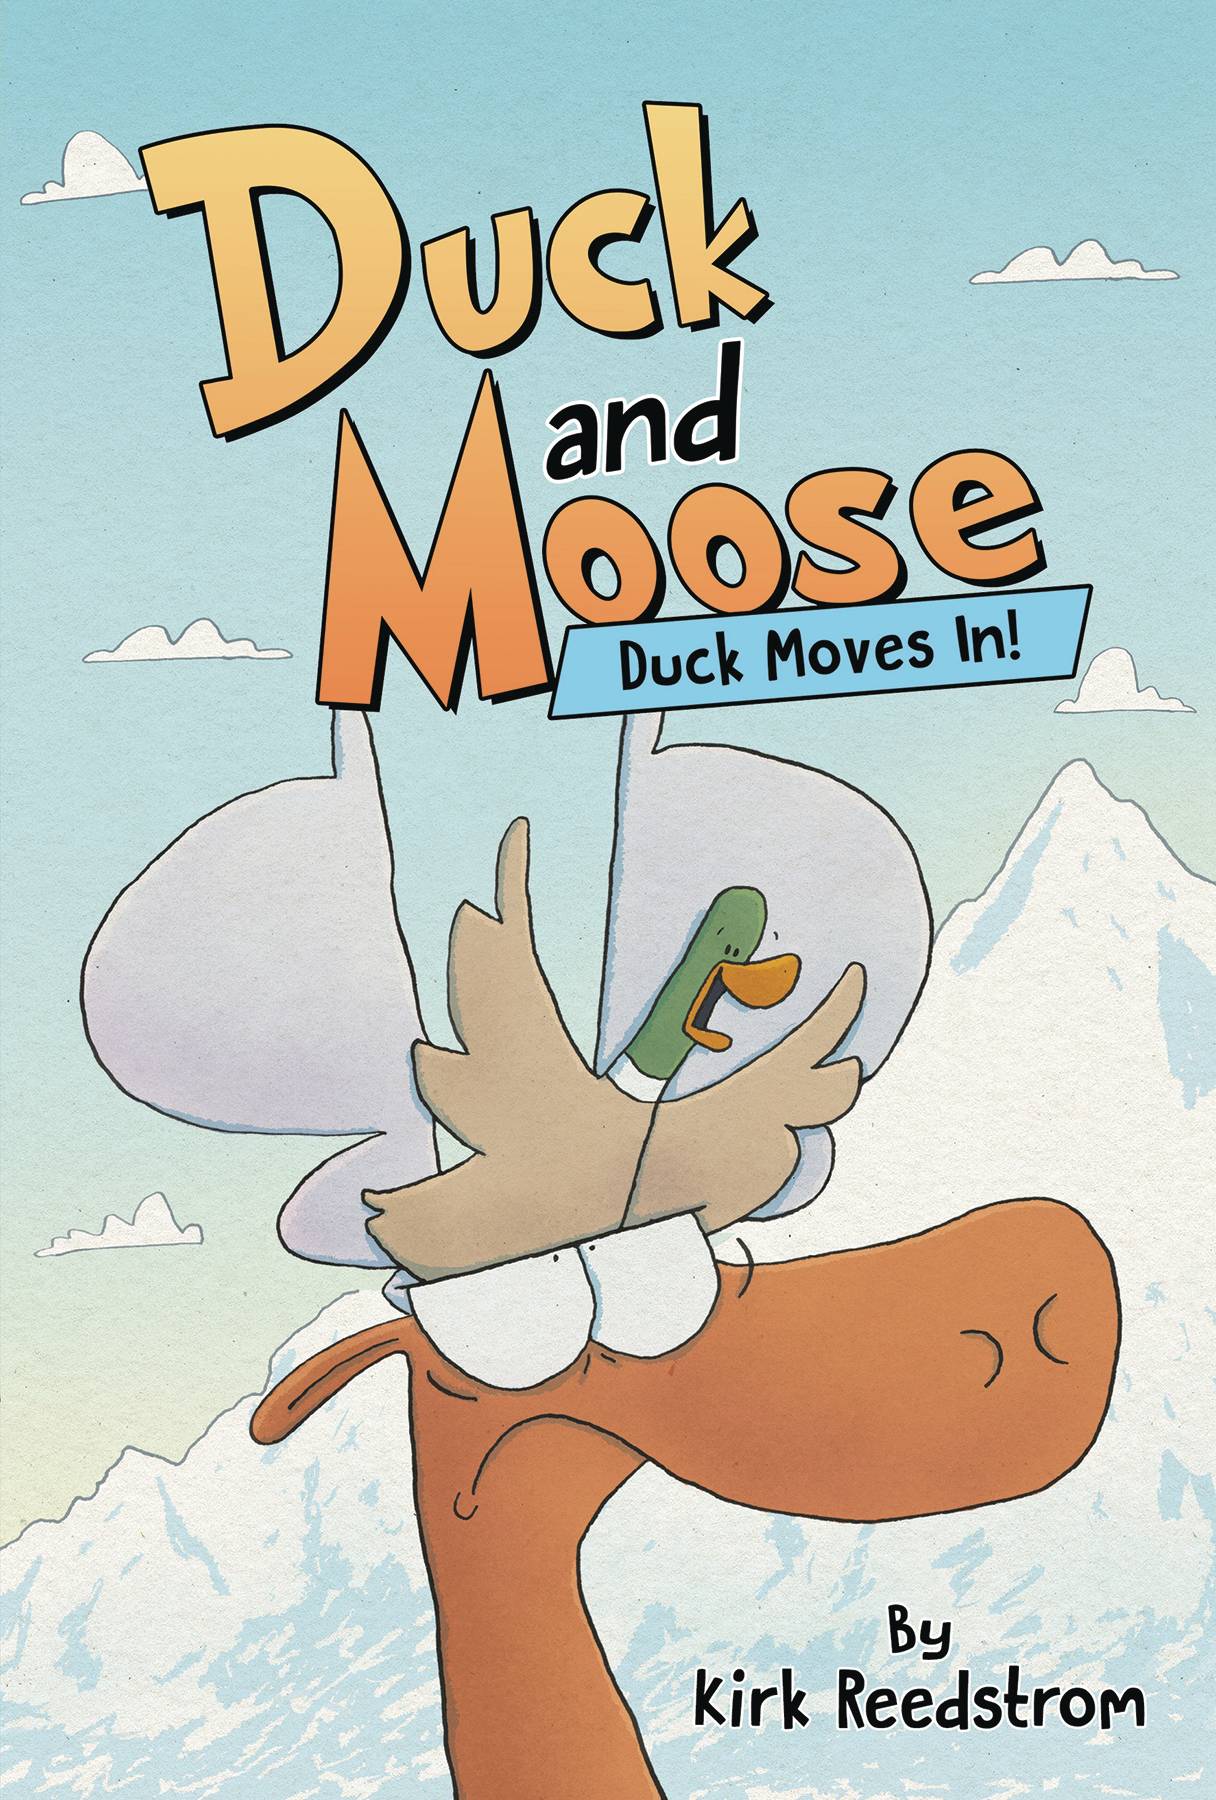 DUCK & MOOSE TP 01 DUCK MOVES IN